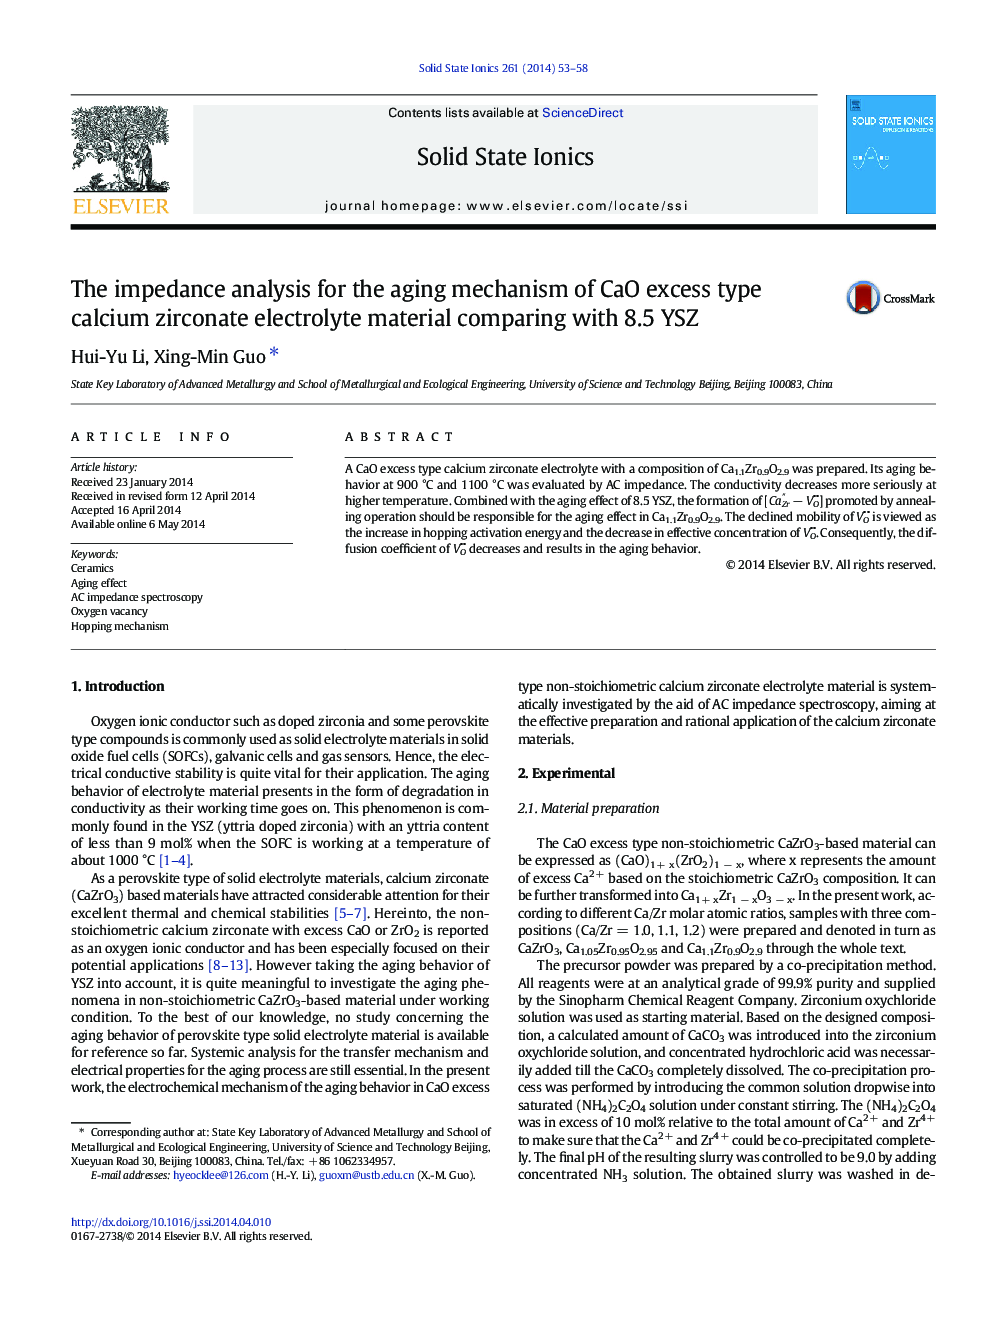 The impedance analysis for the aging mechanism of CaO excess type calcium zirconate electrolyte material comparing with 8.5 YSZ